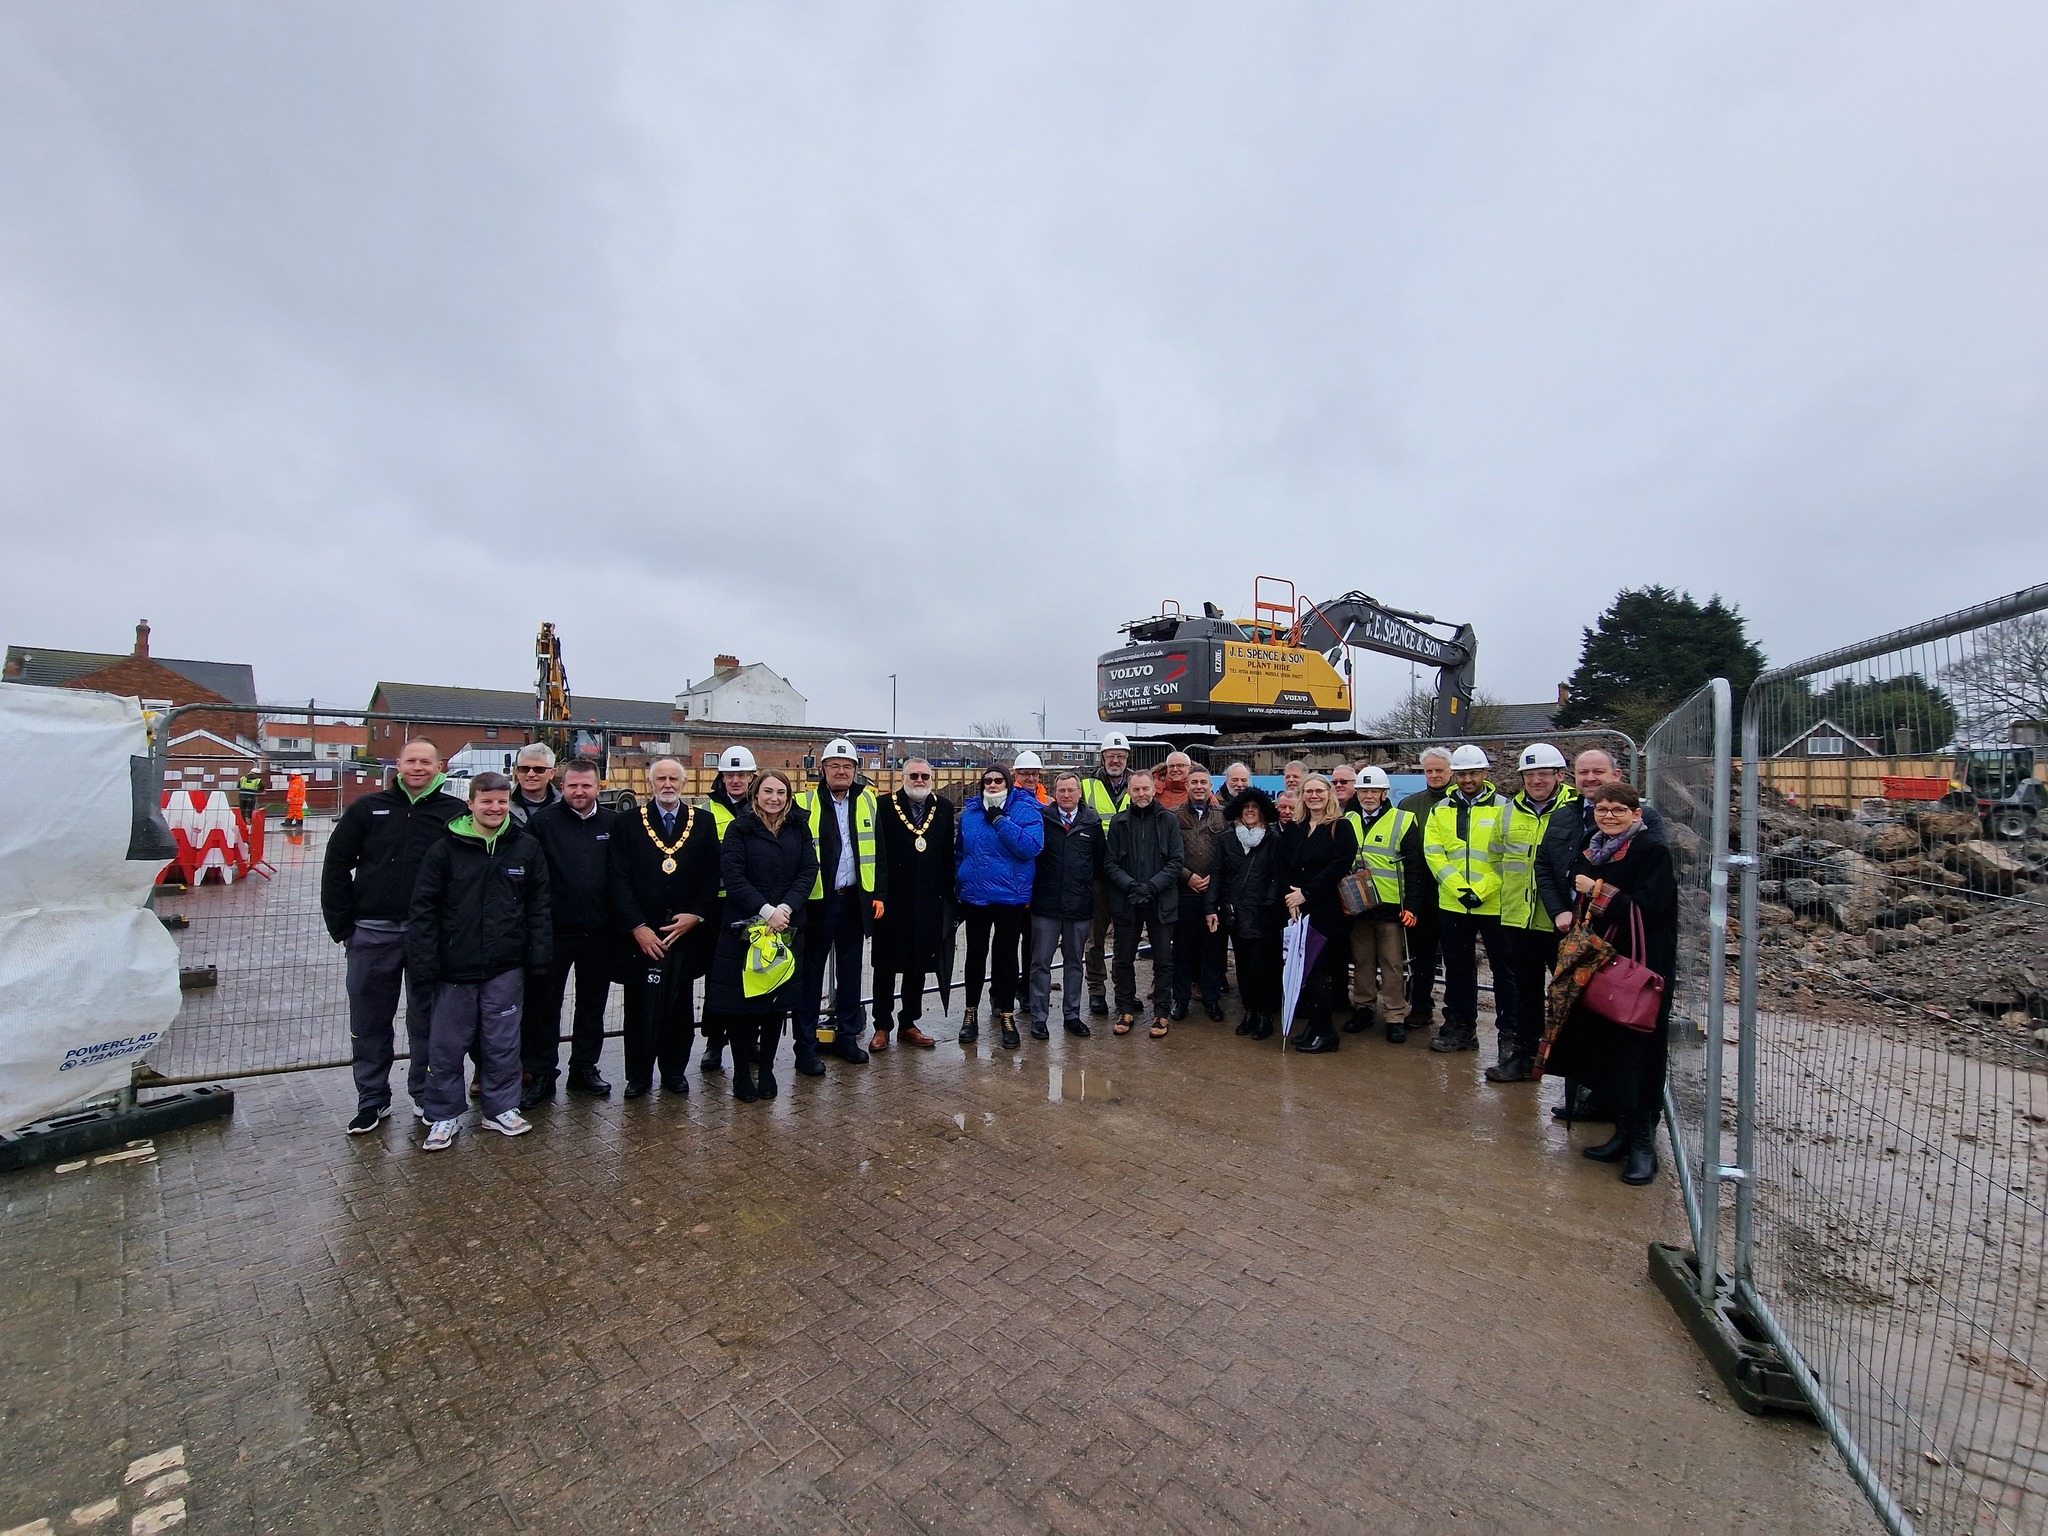 ‘Ground breaking’ start to new leisure hub in Mablethorpe